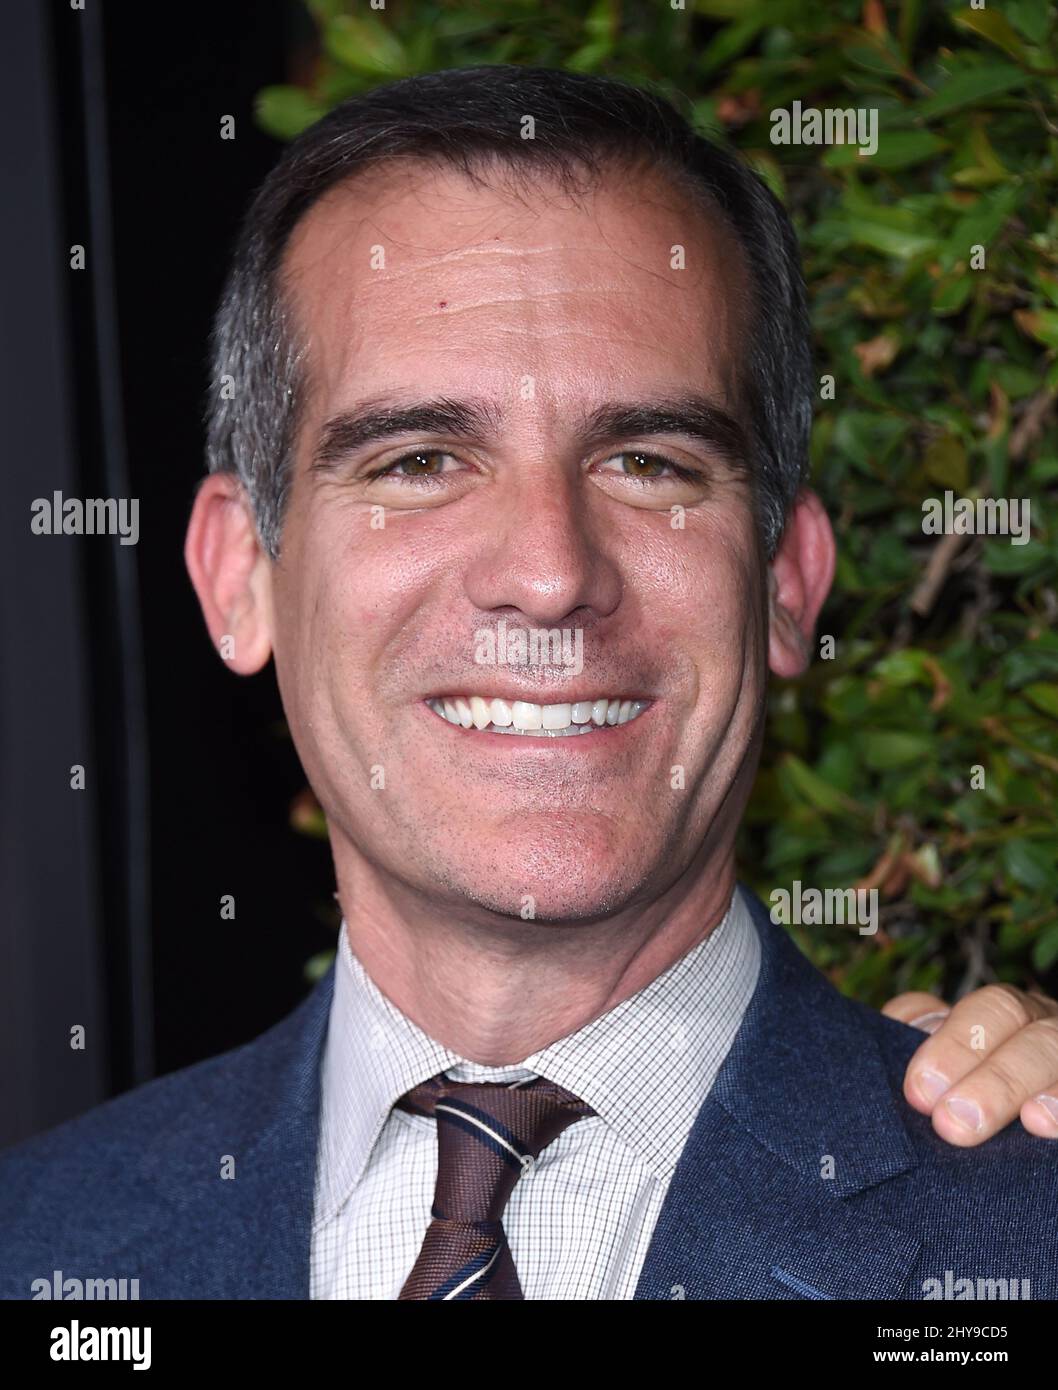 Mayor Eric Garcetti attending the 'Wizarding World of Harry Potter' opening in Los Angeles Stock Photo